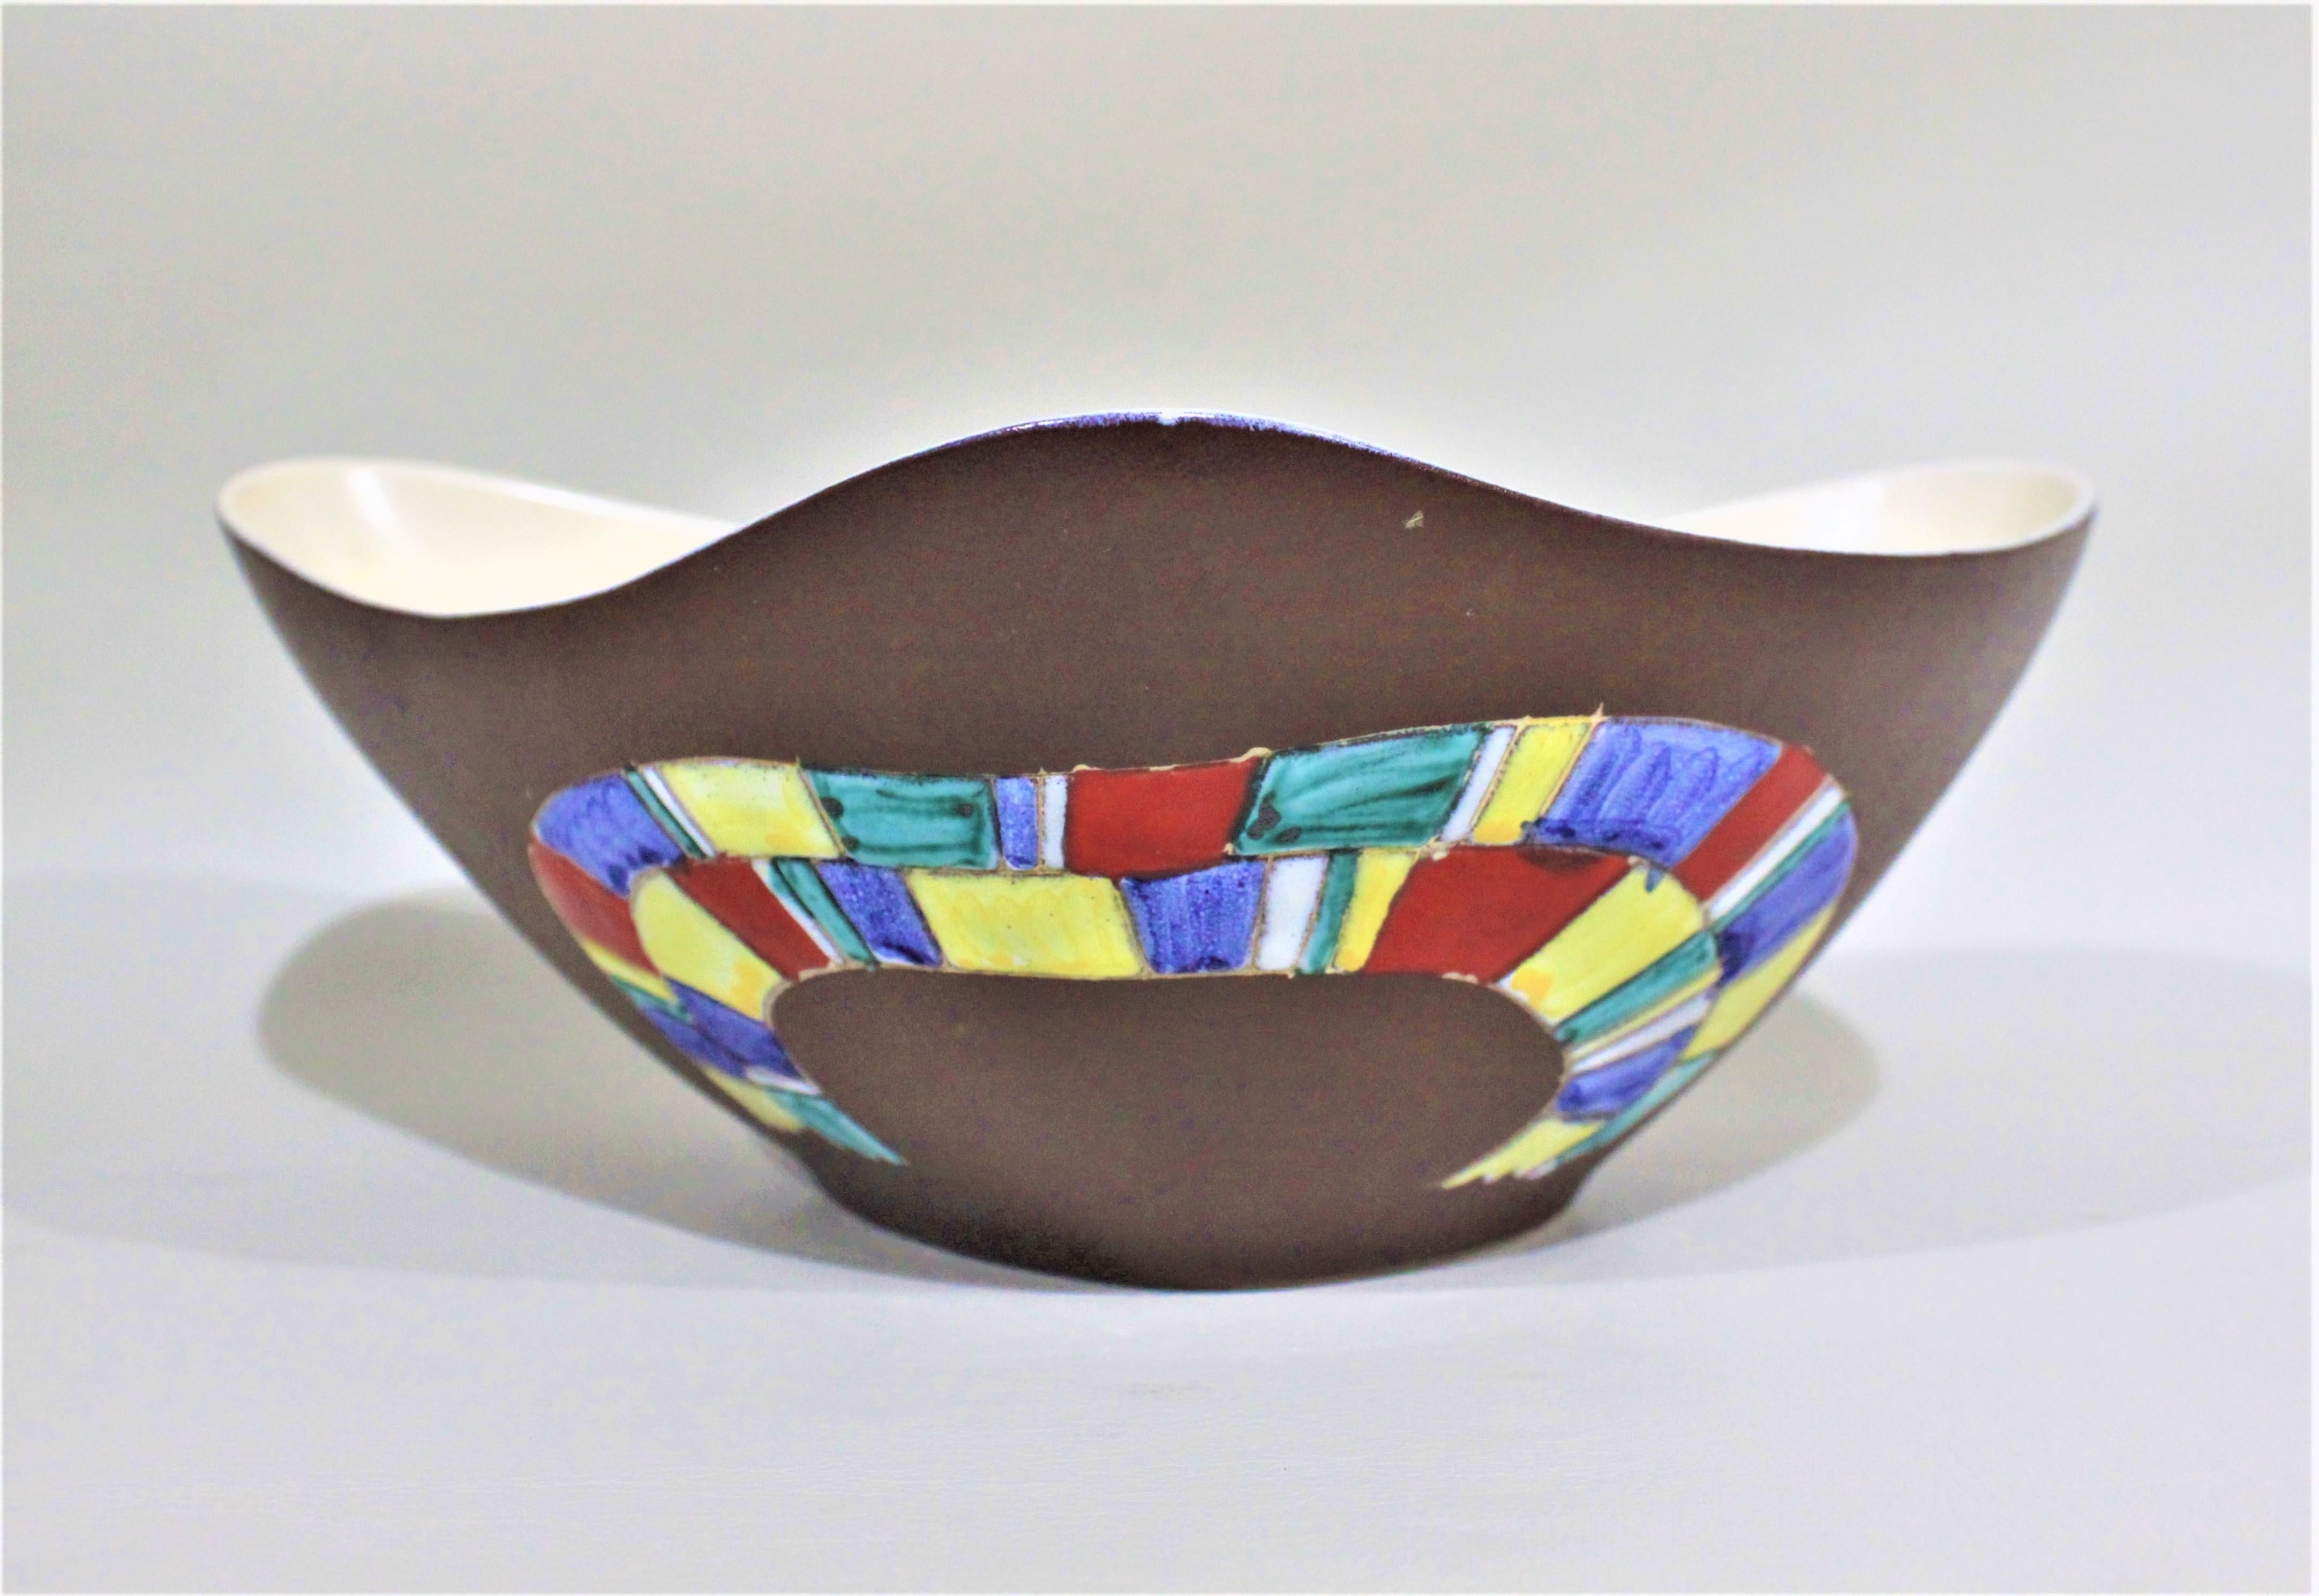 This Mid-Century Modern art pottery bowl was produced in approximately 1965 by Hand Decor of British Columbia Canada, and designed by Herta Gerz. The bowl is somewhat triangular in shape with rounded corners and sweeping curves between each point.